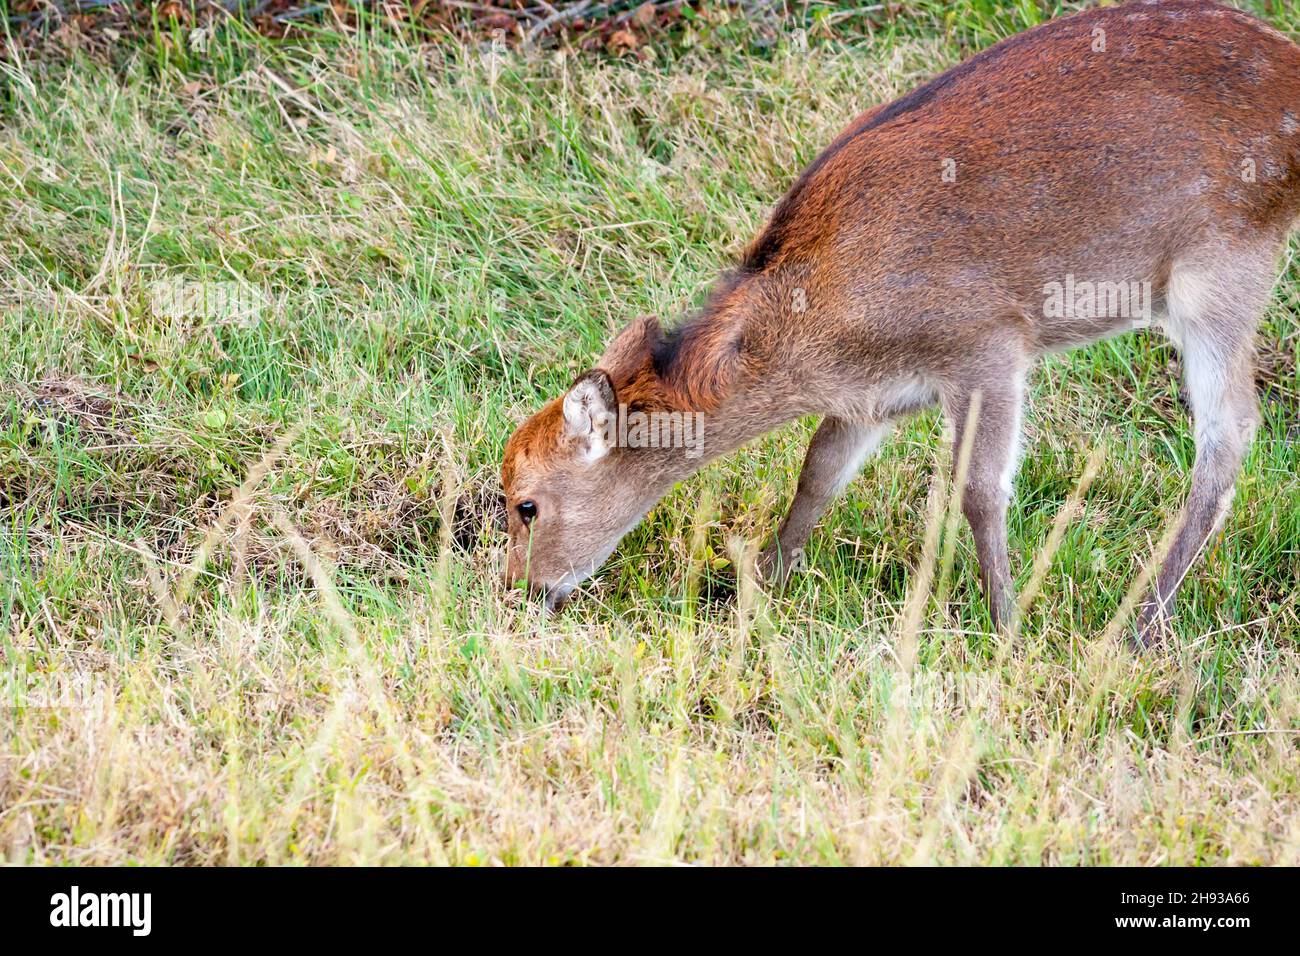 A Sika Deer (Cervus nippon), also known as a Sika Elk or Japanese Elk, grazing at Assateague Island National Seashore, Maryland Stock Photo